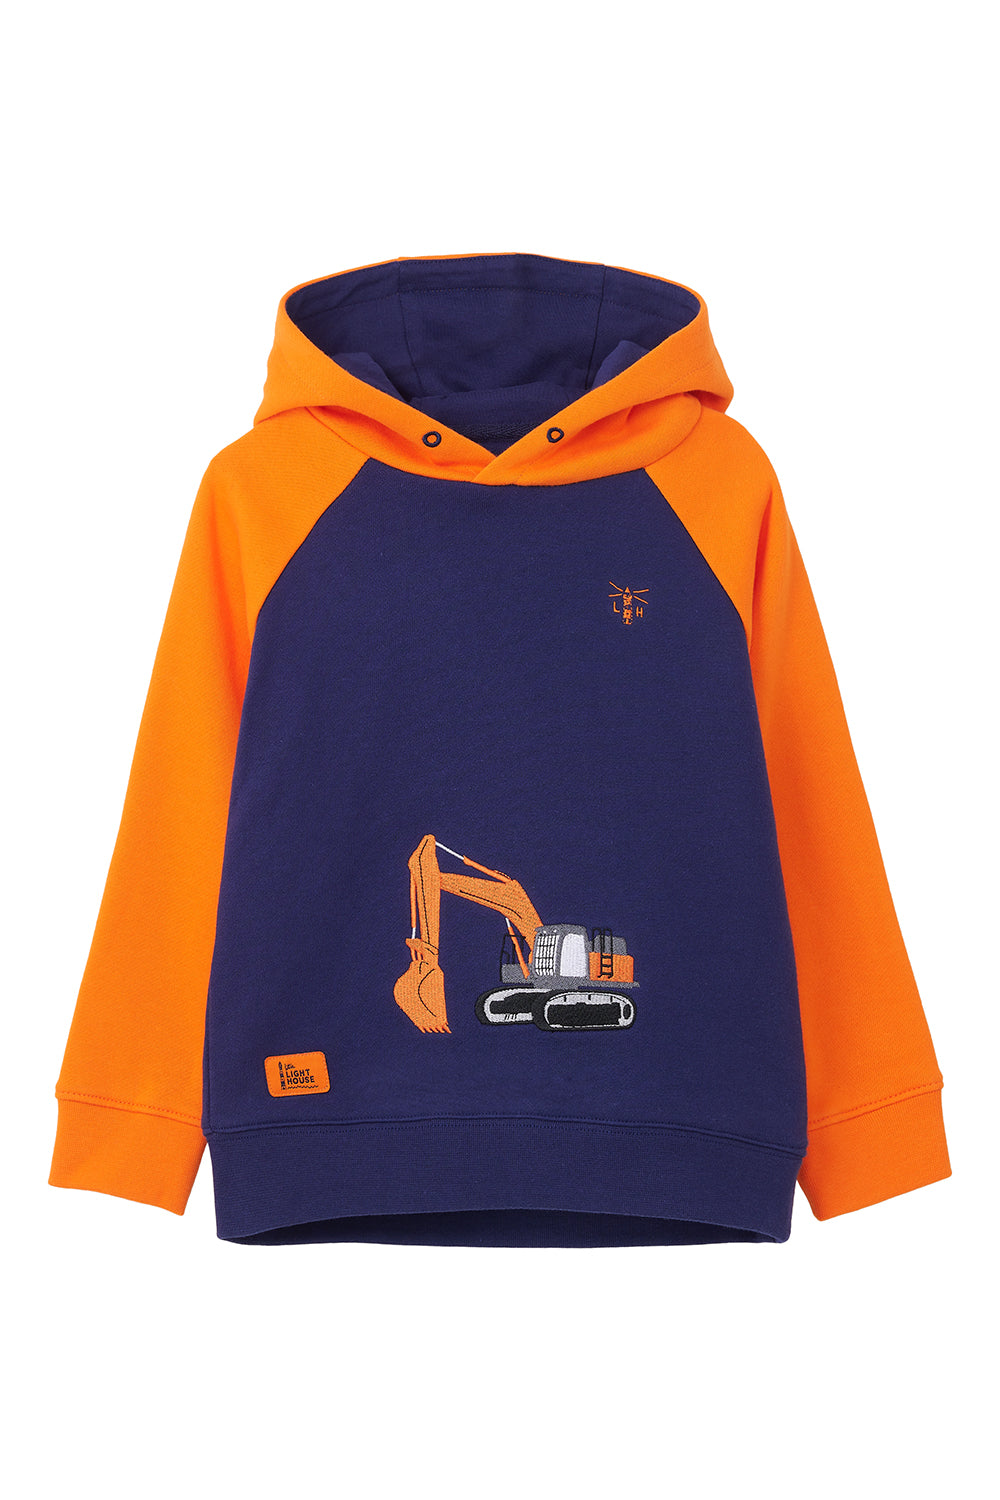 Lighthouse / Mills Country Store - Jack Hoodie Orange Digger @ www.millscountrystore.com